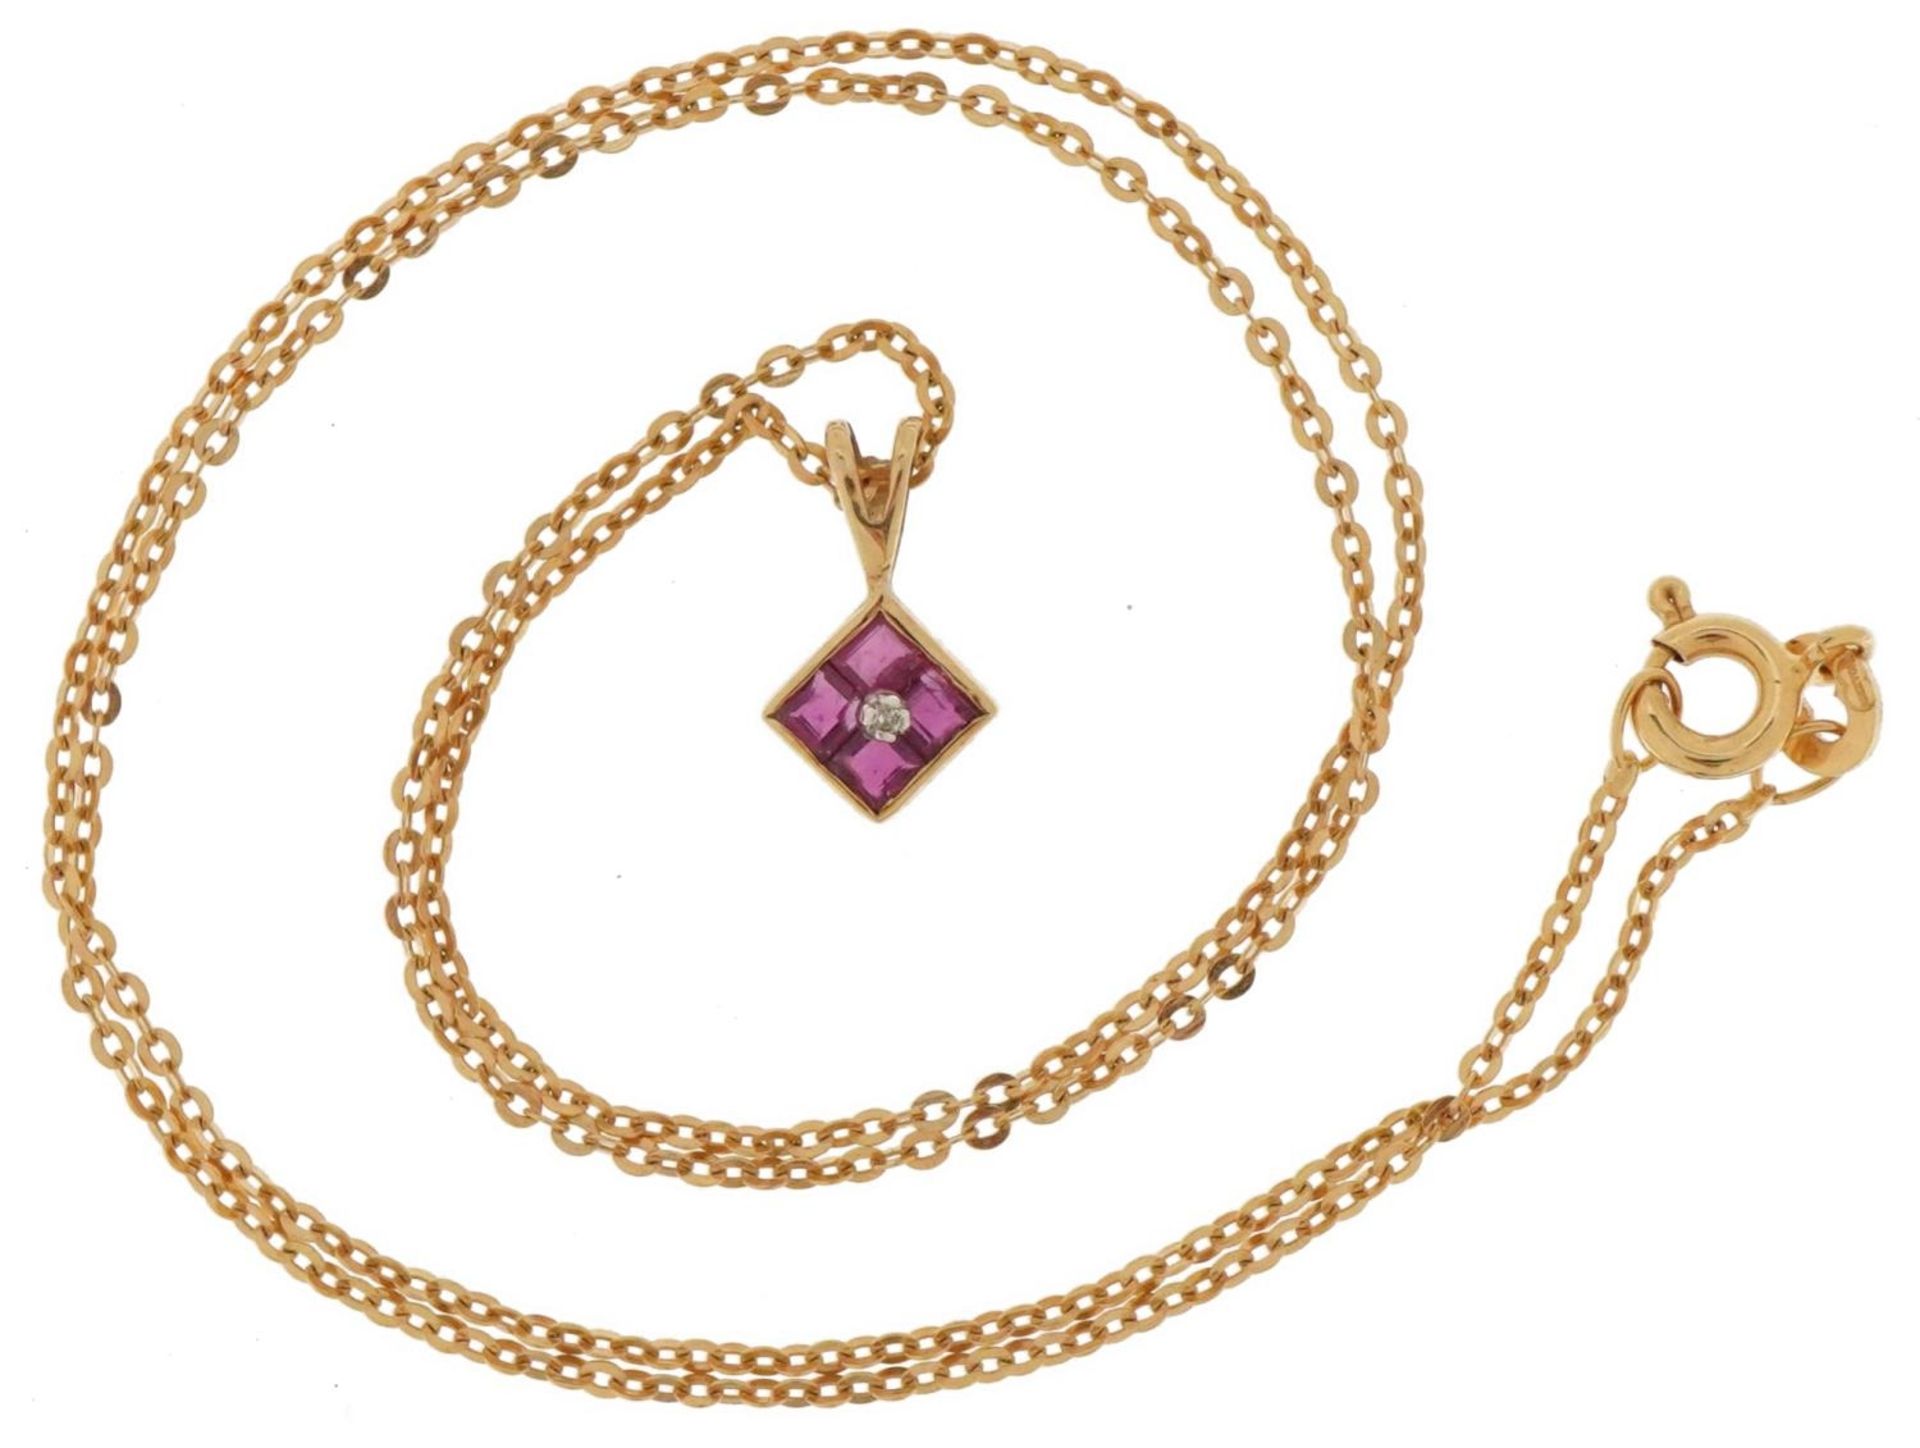 9ct gold pink spinel and diamond pendant on a Italian Unoaerre 14ct gold necklace, 1.3cm high and - Image 2 of 4